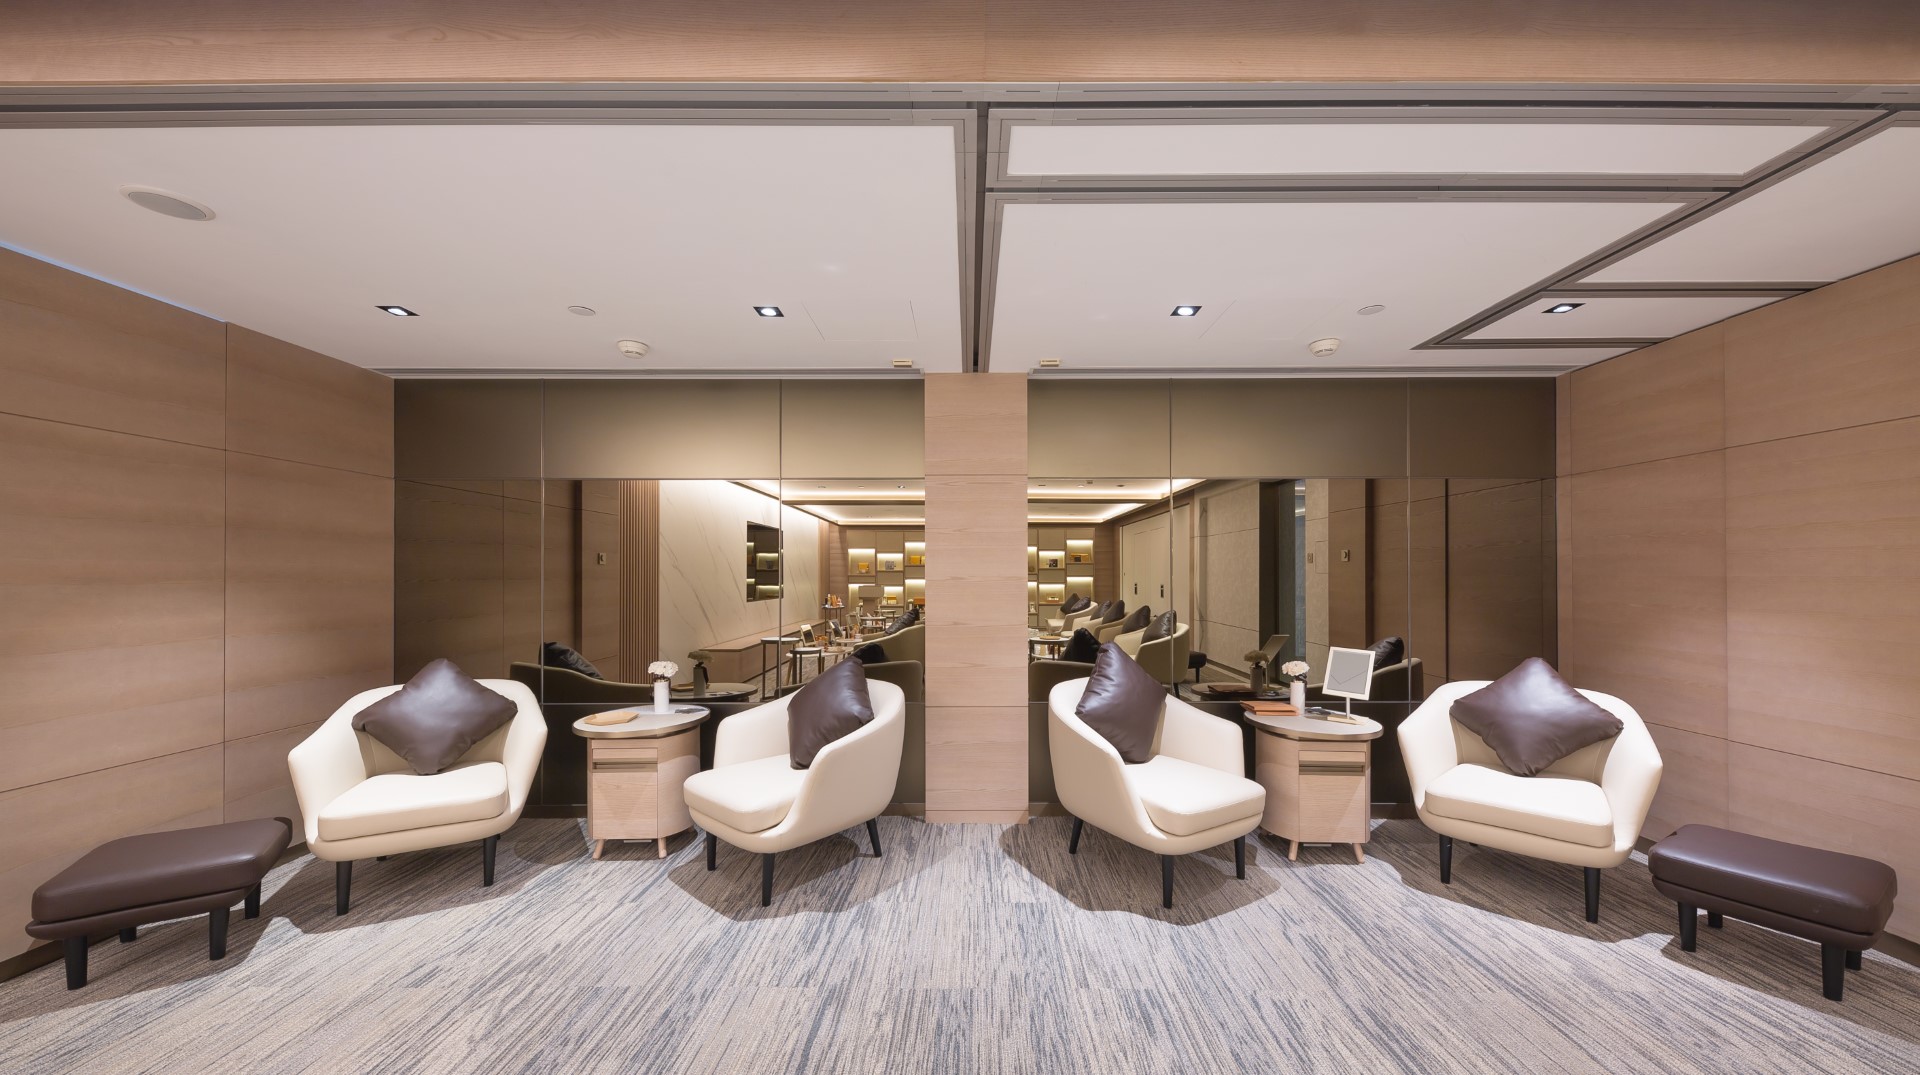 Eric Fung - Once Design Studio Limited - Amorepacific Club Lounge